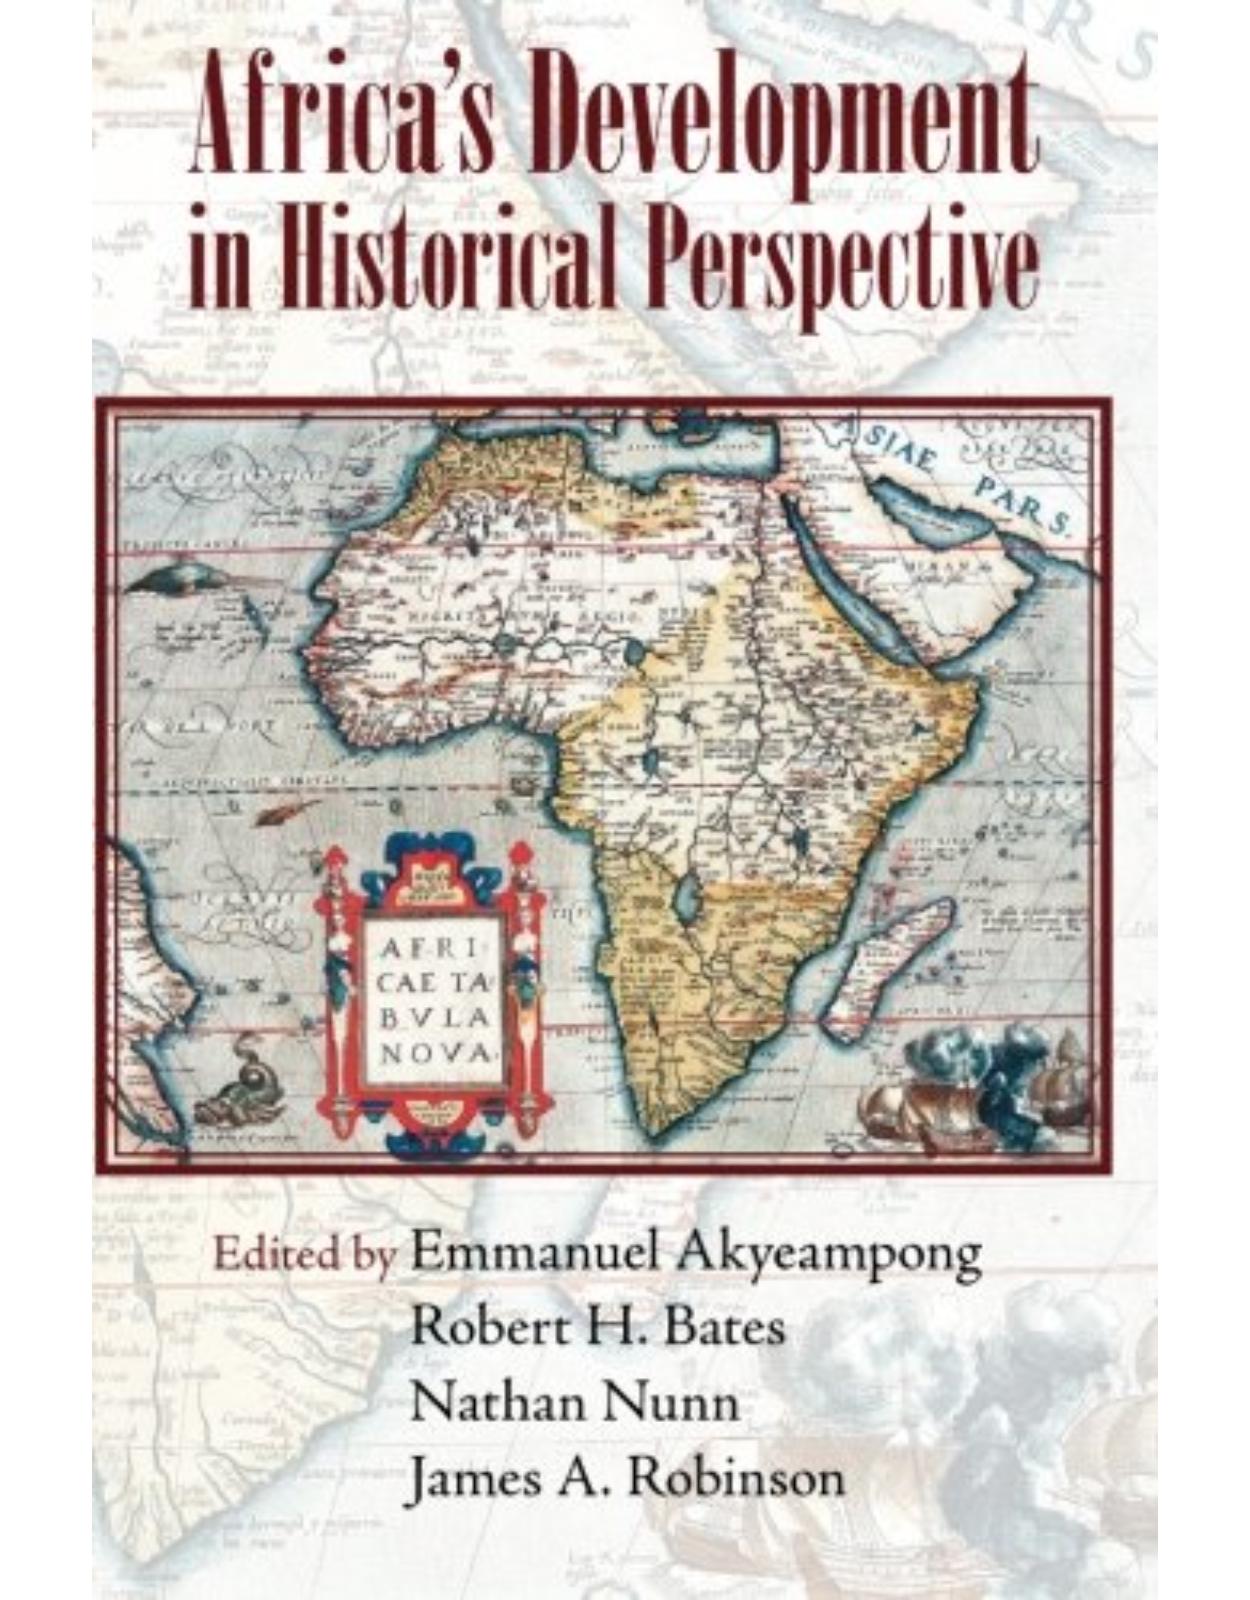 AfricaÂ’s Development in Historical Perspective